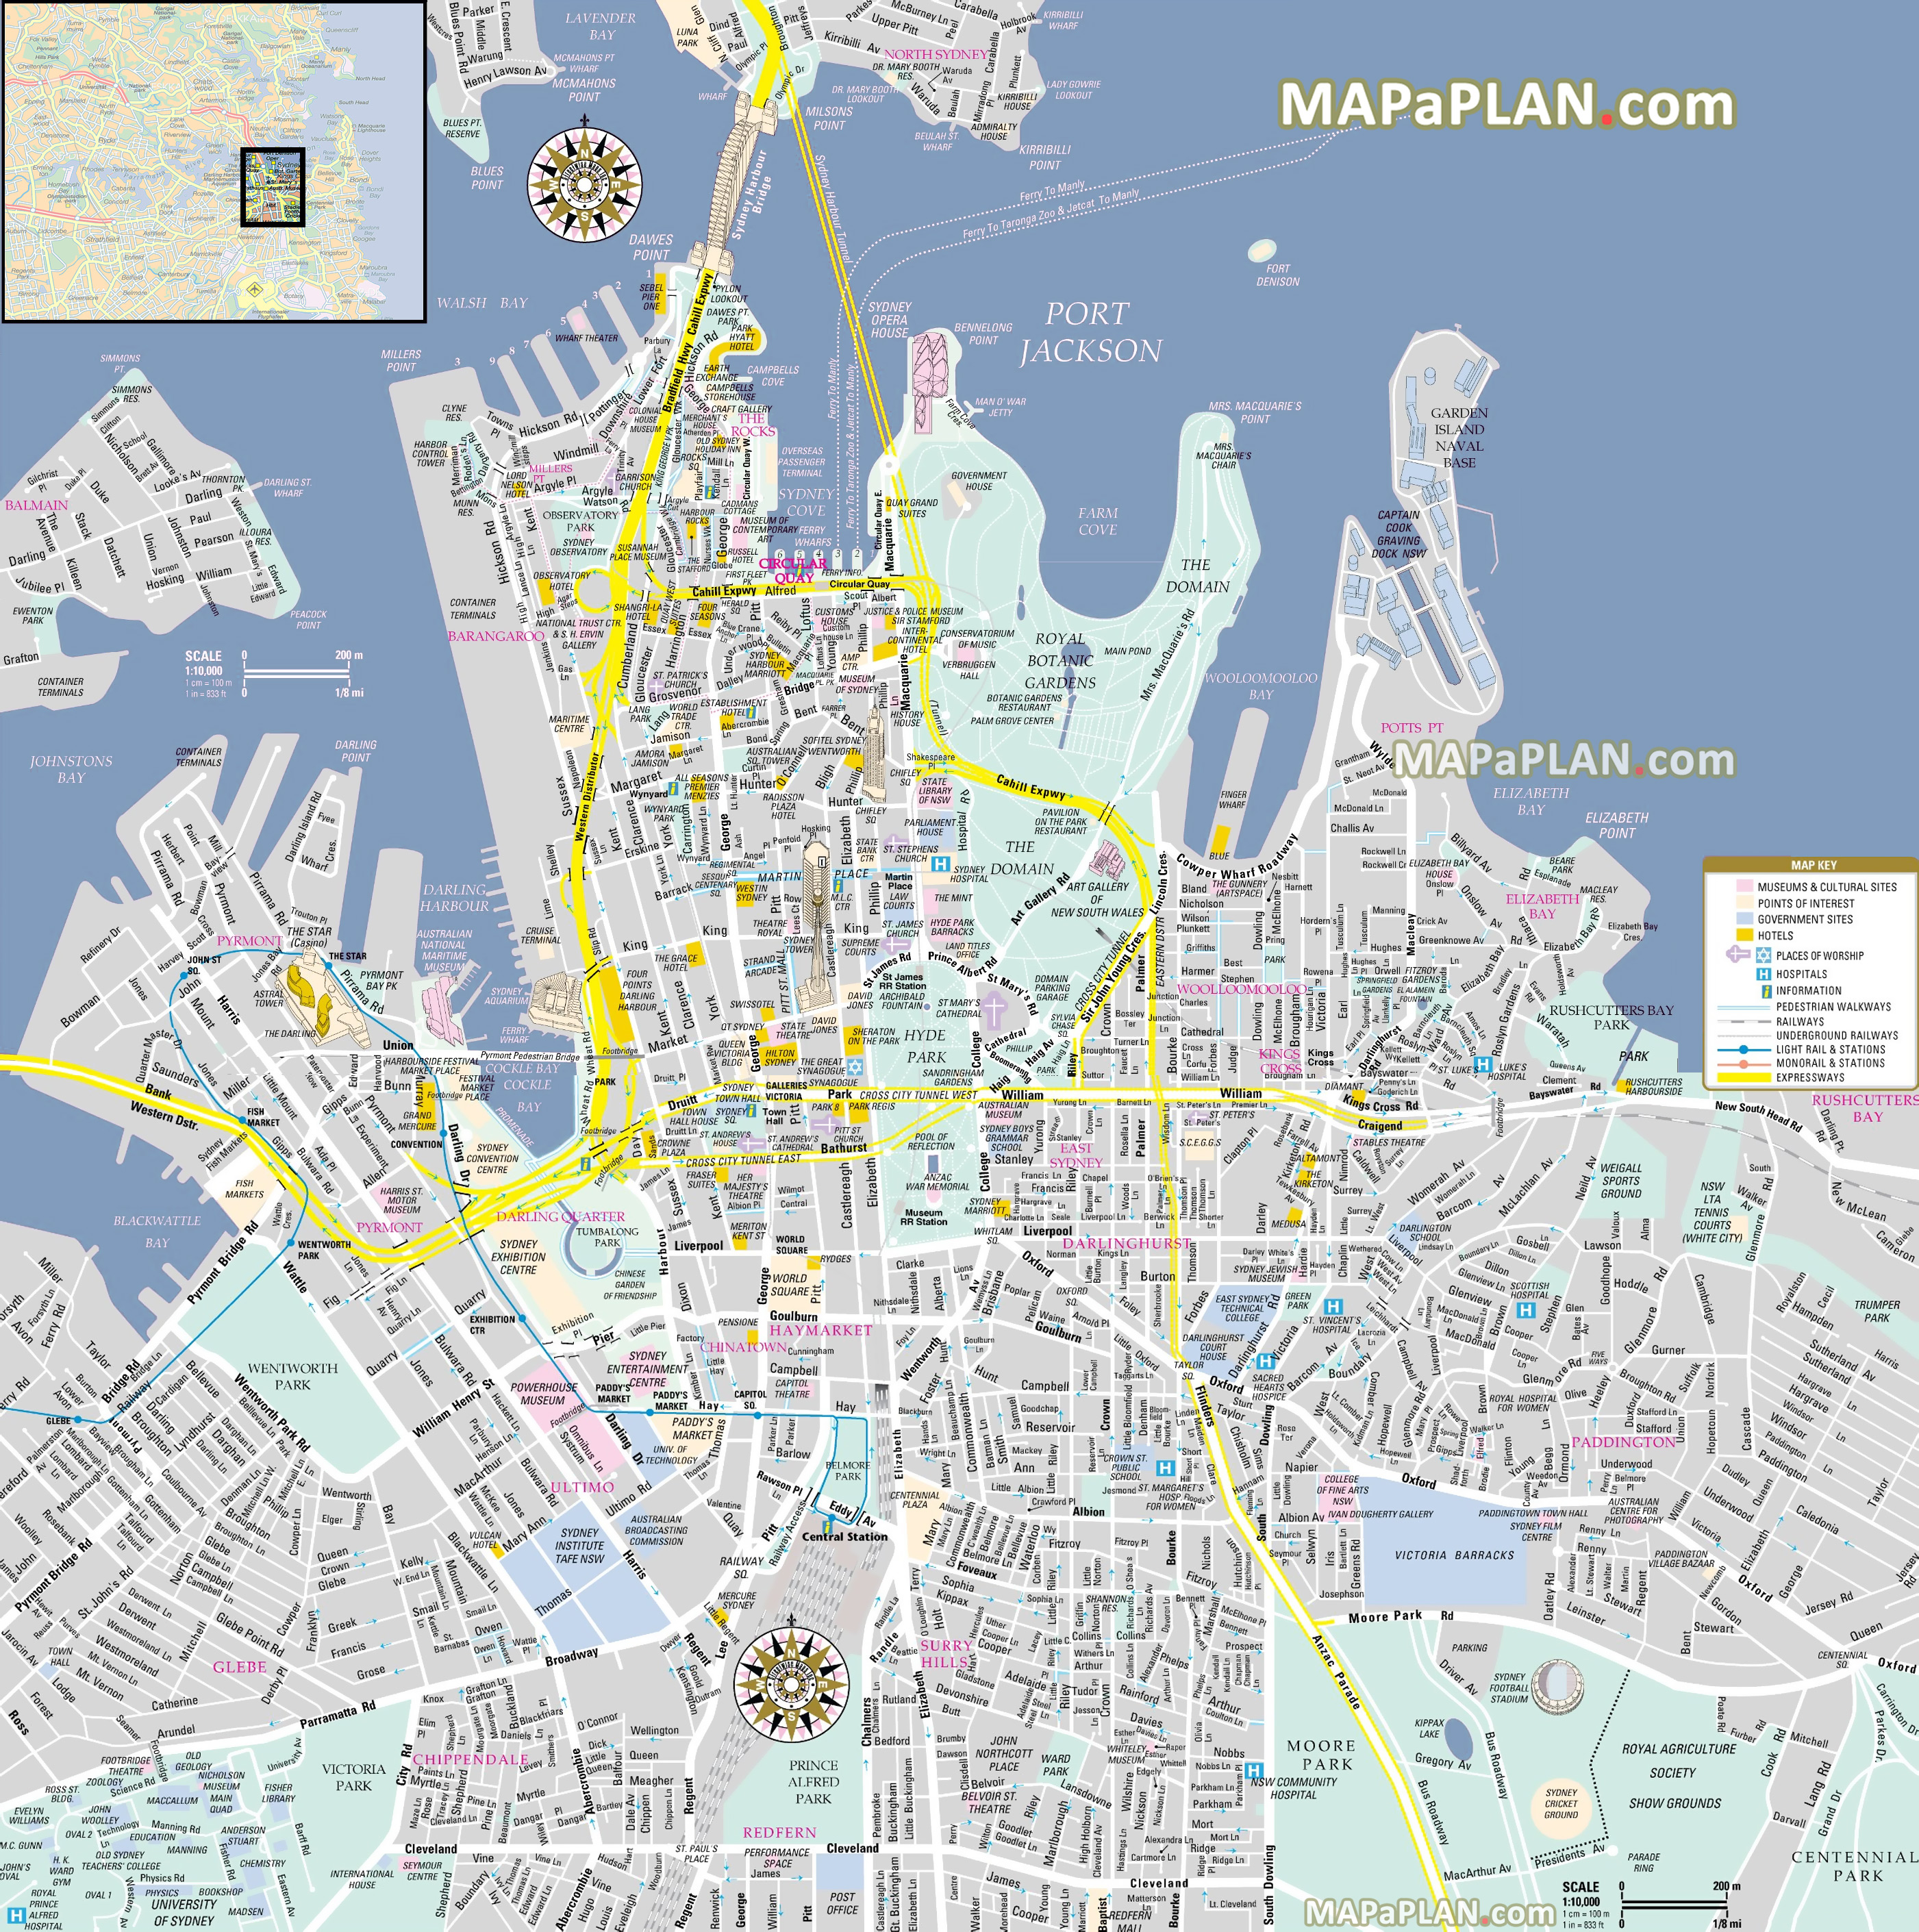 Sydney map - Inner city centre CBD detailed street travel guide with